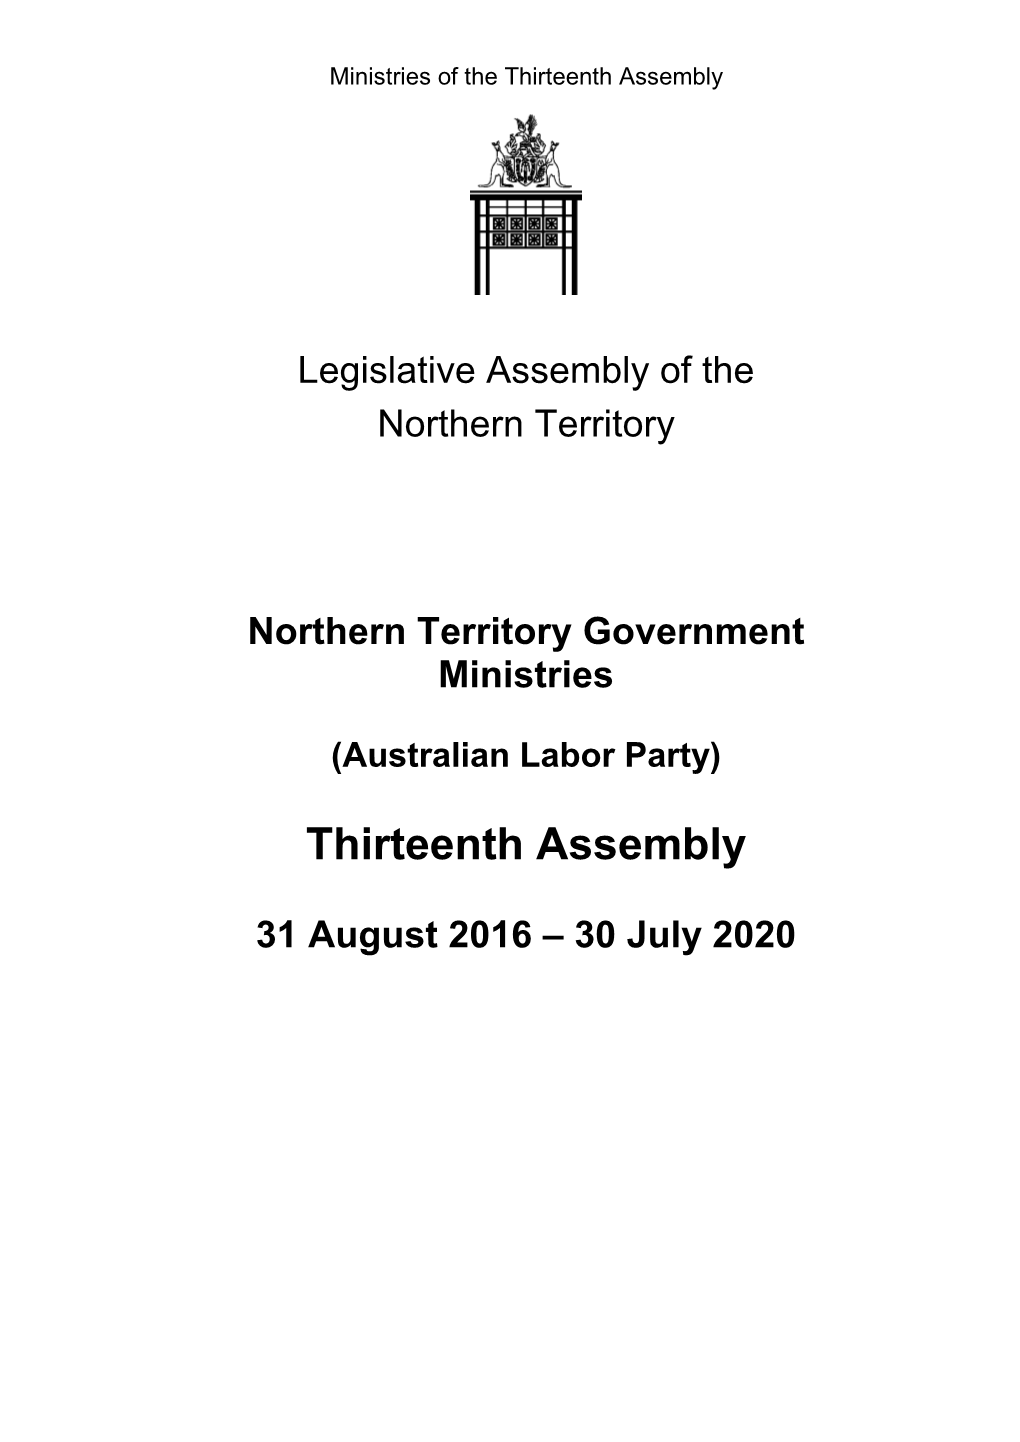 13Th Assembly